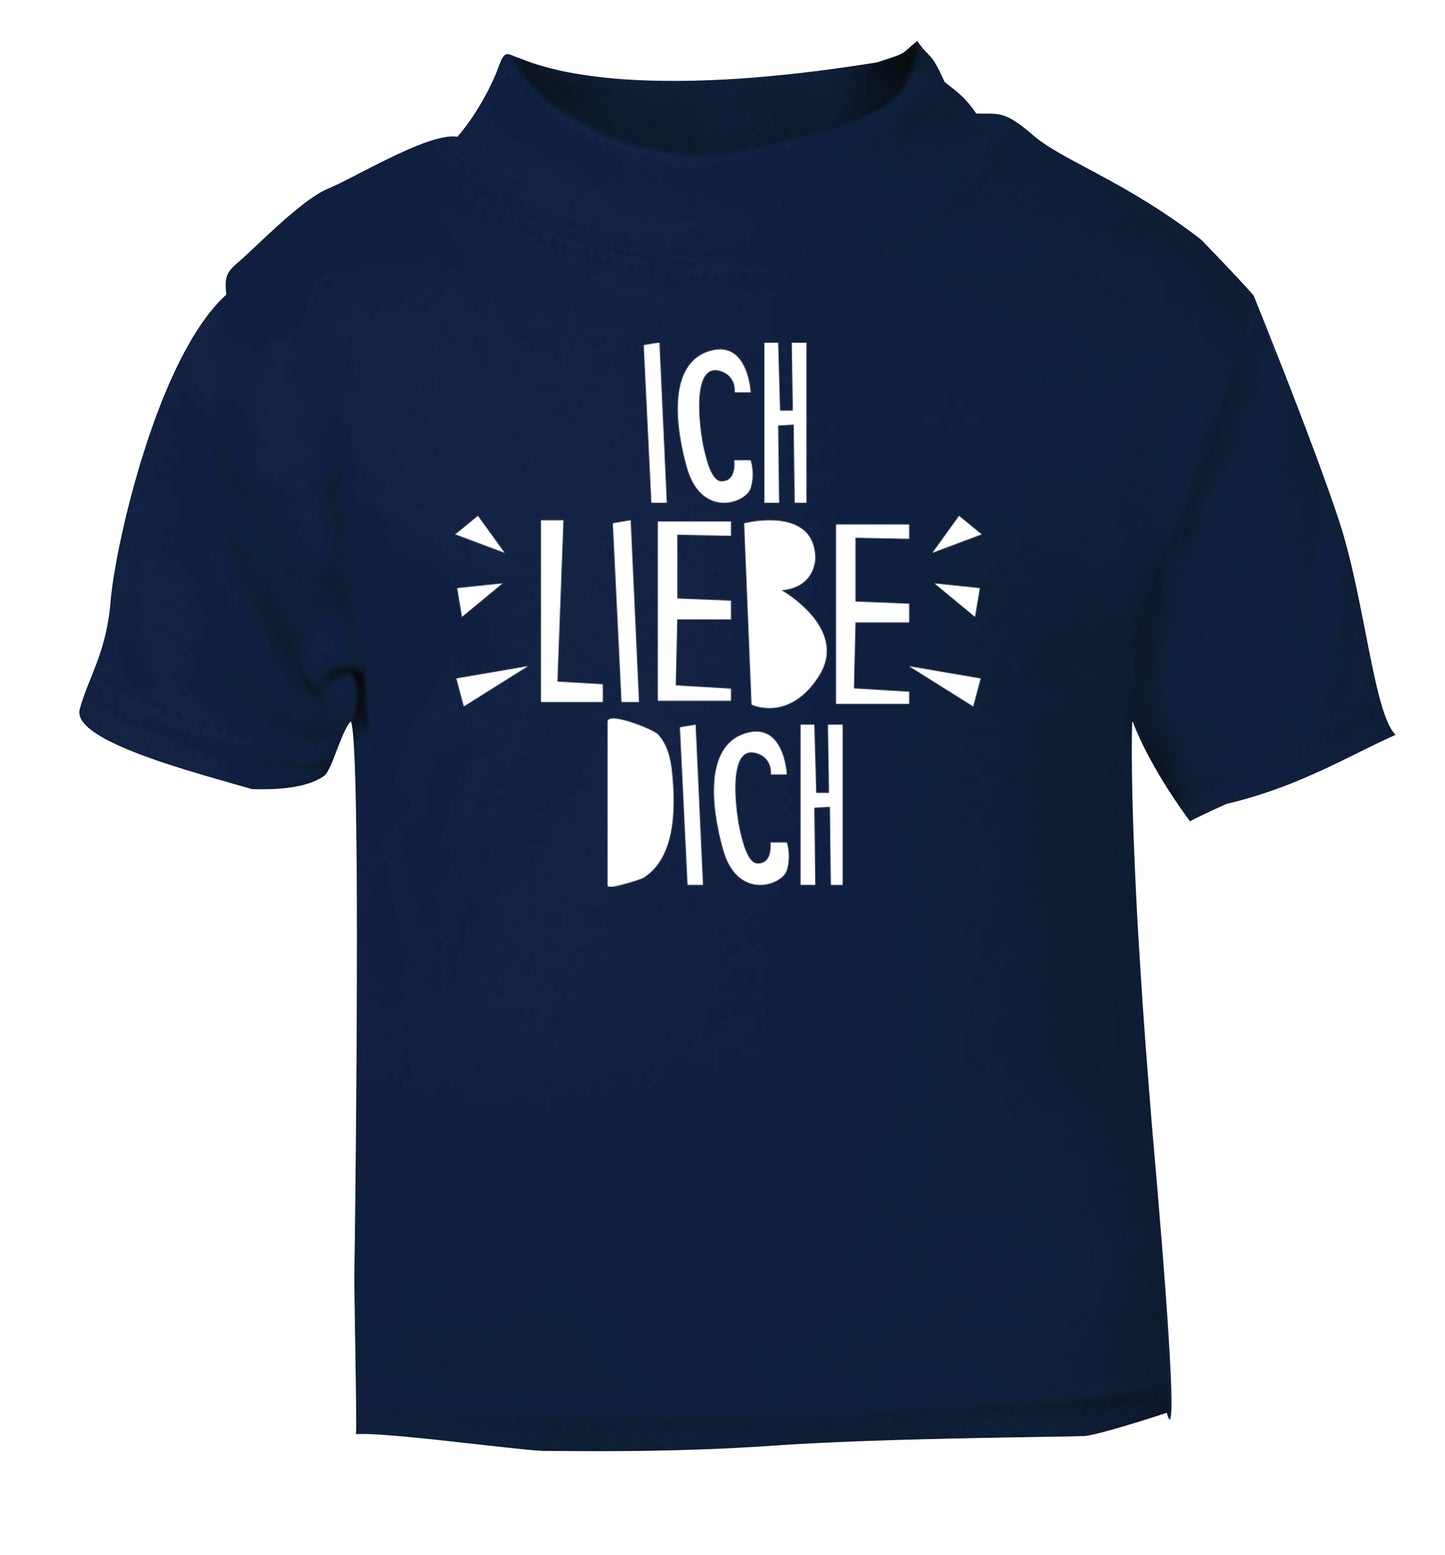 Ich liebe dich - I love you navy Baby Toddler Tshirt 2 Years